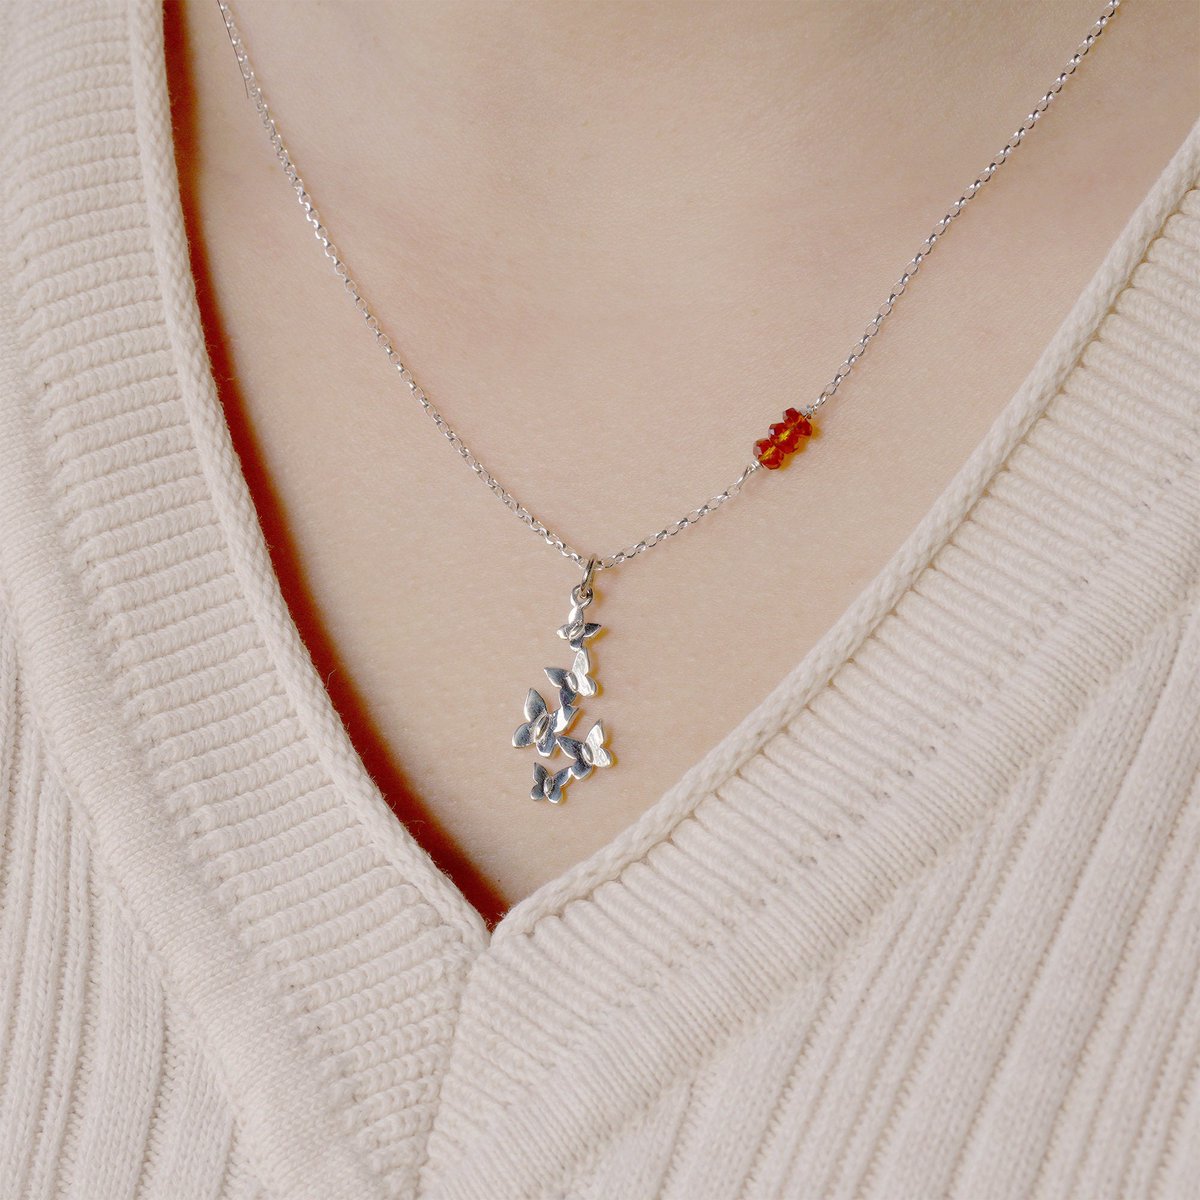 Butterfly Birthstone Necklace sterling silver, butterflies cluster, gemstone, birthday gift for her, dainty simple minimal everyday necklace tuppu.net/3f4713e8 #etsygifts #etsyjewelry #etsyfinds #Etsy #shopsmall #etsyseller #giftsforher